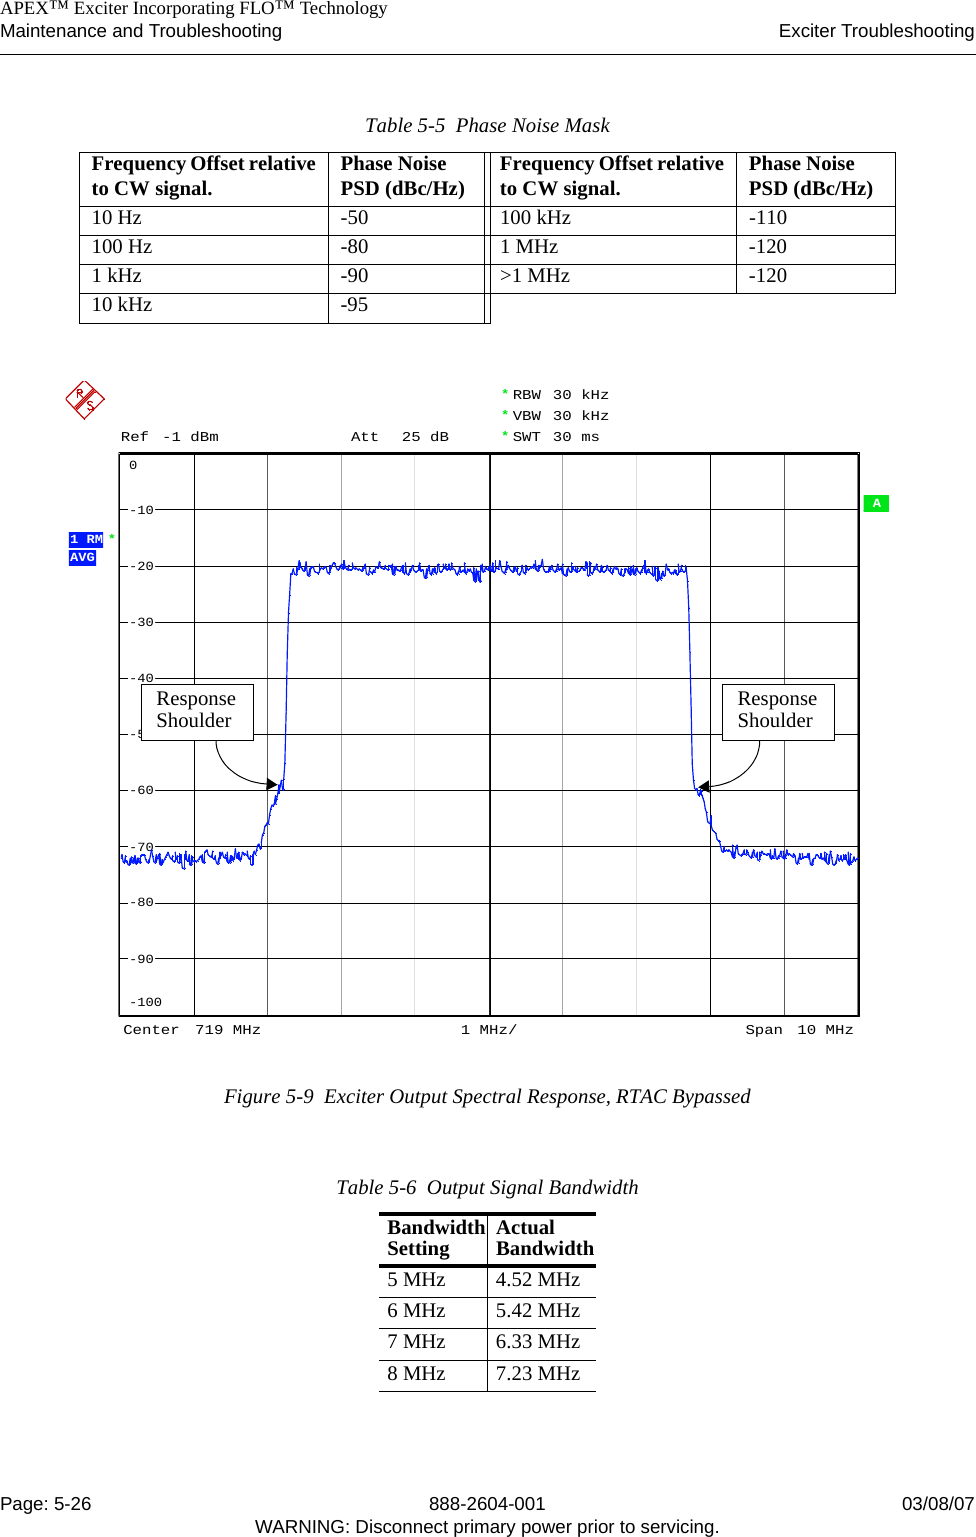    APEX™ Exciter Incorporating FLO™ TechnologyMaintenance and Troubleshooting Exciter TroubleshootingPage: 5-26 888-2604-001 03/08/07WARNING: Disconnect primary power prior to servicing.Figure 5-9  Exciter Output Spectral Response, RTAC BypassedTable 5-5  Phase Noise MaskFrequency Offset relative to CW signal. Phase Noise PSD (dBc/Hz) Frequency Offset relative to CW signal. Phase Noise PSD (dBc/Hz)10 Hz -50 100 kHz -110100 Hz -80 1 MHz -1201 kHz -90 &gt;1 MHz -12010 kHz -95Table 5-6  Output Signal BandwidthBandwidth Setting Actual Bandwidth5 MHz 4.52 MHz6 MHz 5.42 MHz7 MHz 6.33 MHz8 MHz 7.23 MHz A *RBW  30 kHzSWT  30 ms*VBW  30 kHz*AVG*1 RMAtt  25 dBRef -1 dBmCenter 719 MHz Span 10 MHz1 MHz/-100-90-80-70-60-50-40-30-20-100ResponseShoulder ResponseShoulder